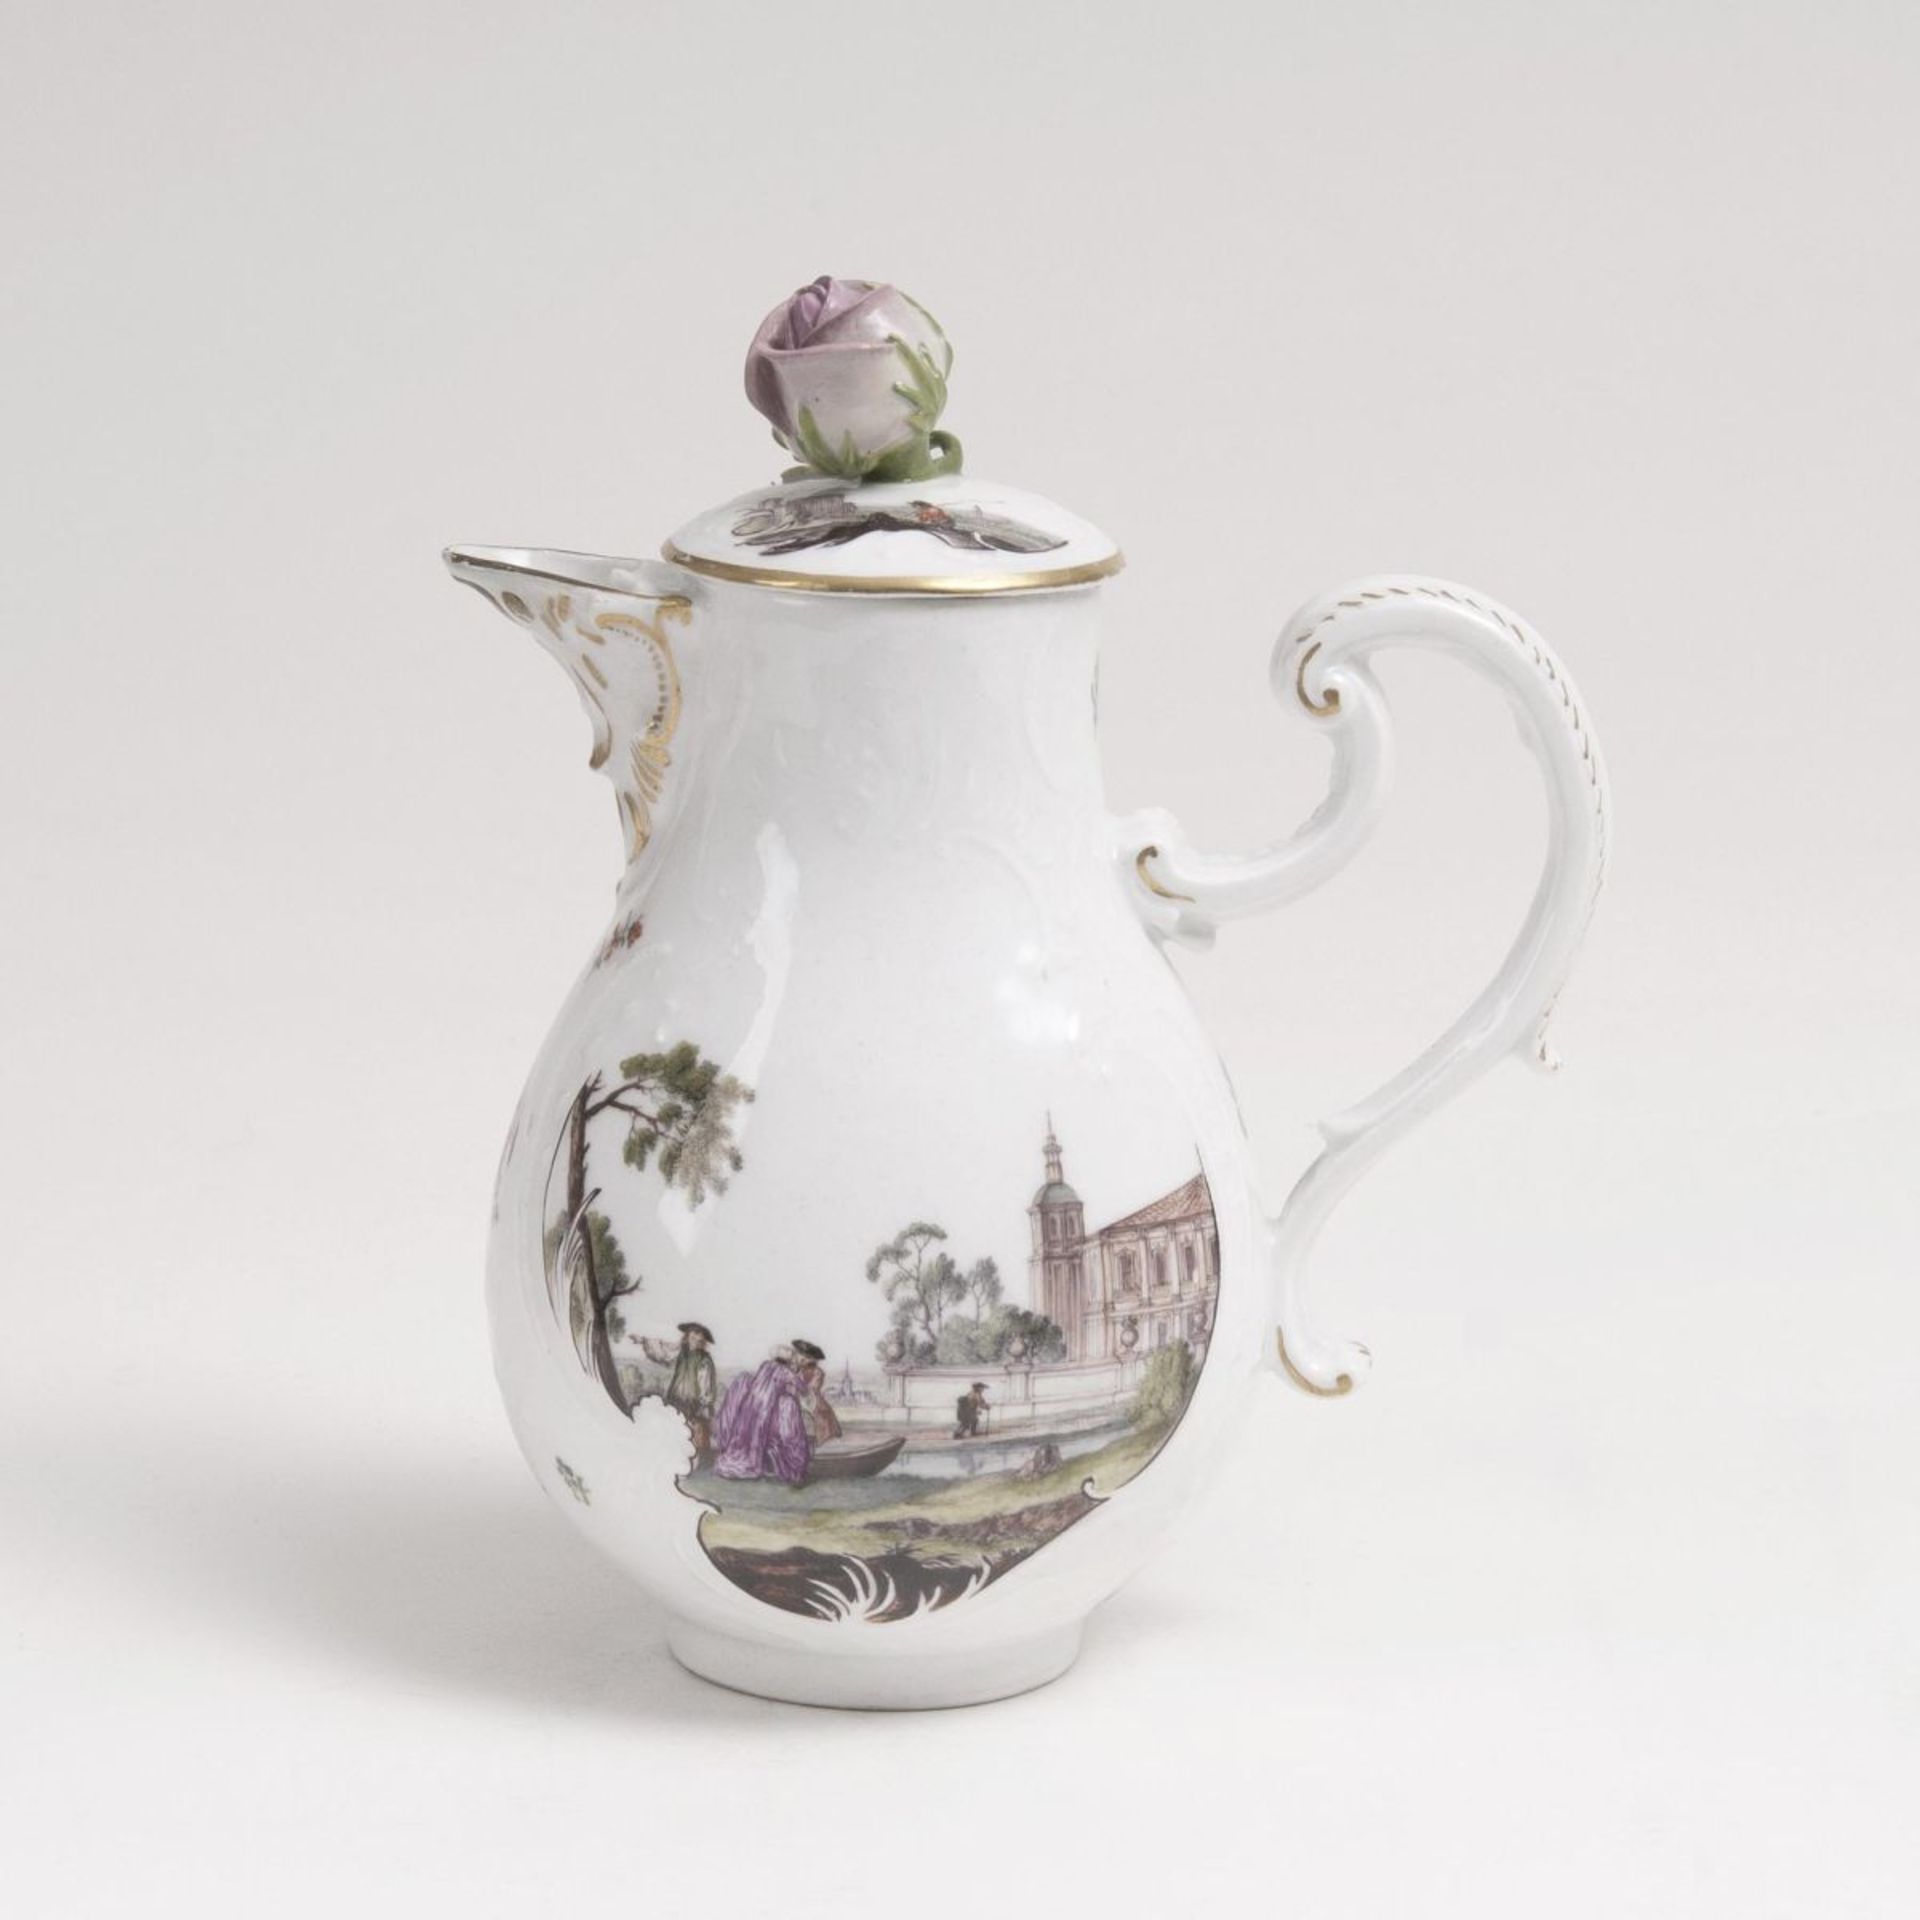 A Rococo Coffee Pot with Dulong Relief and LandscapesMeissen, aorund 1745. Porcelain. Obverse and